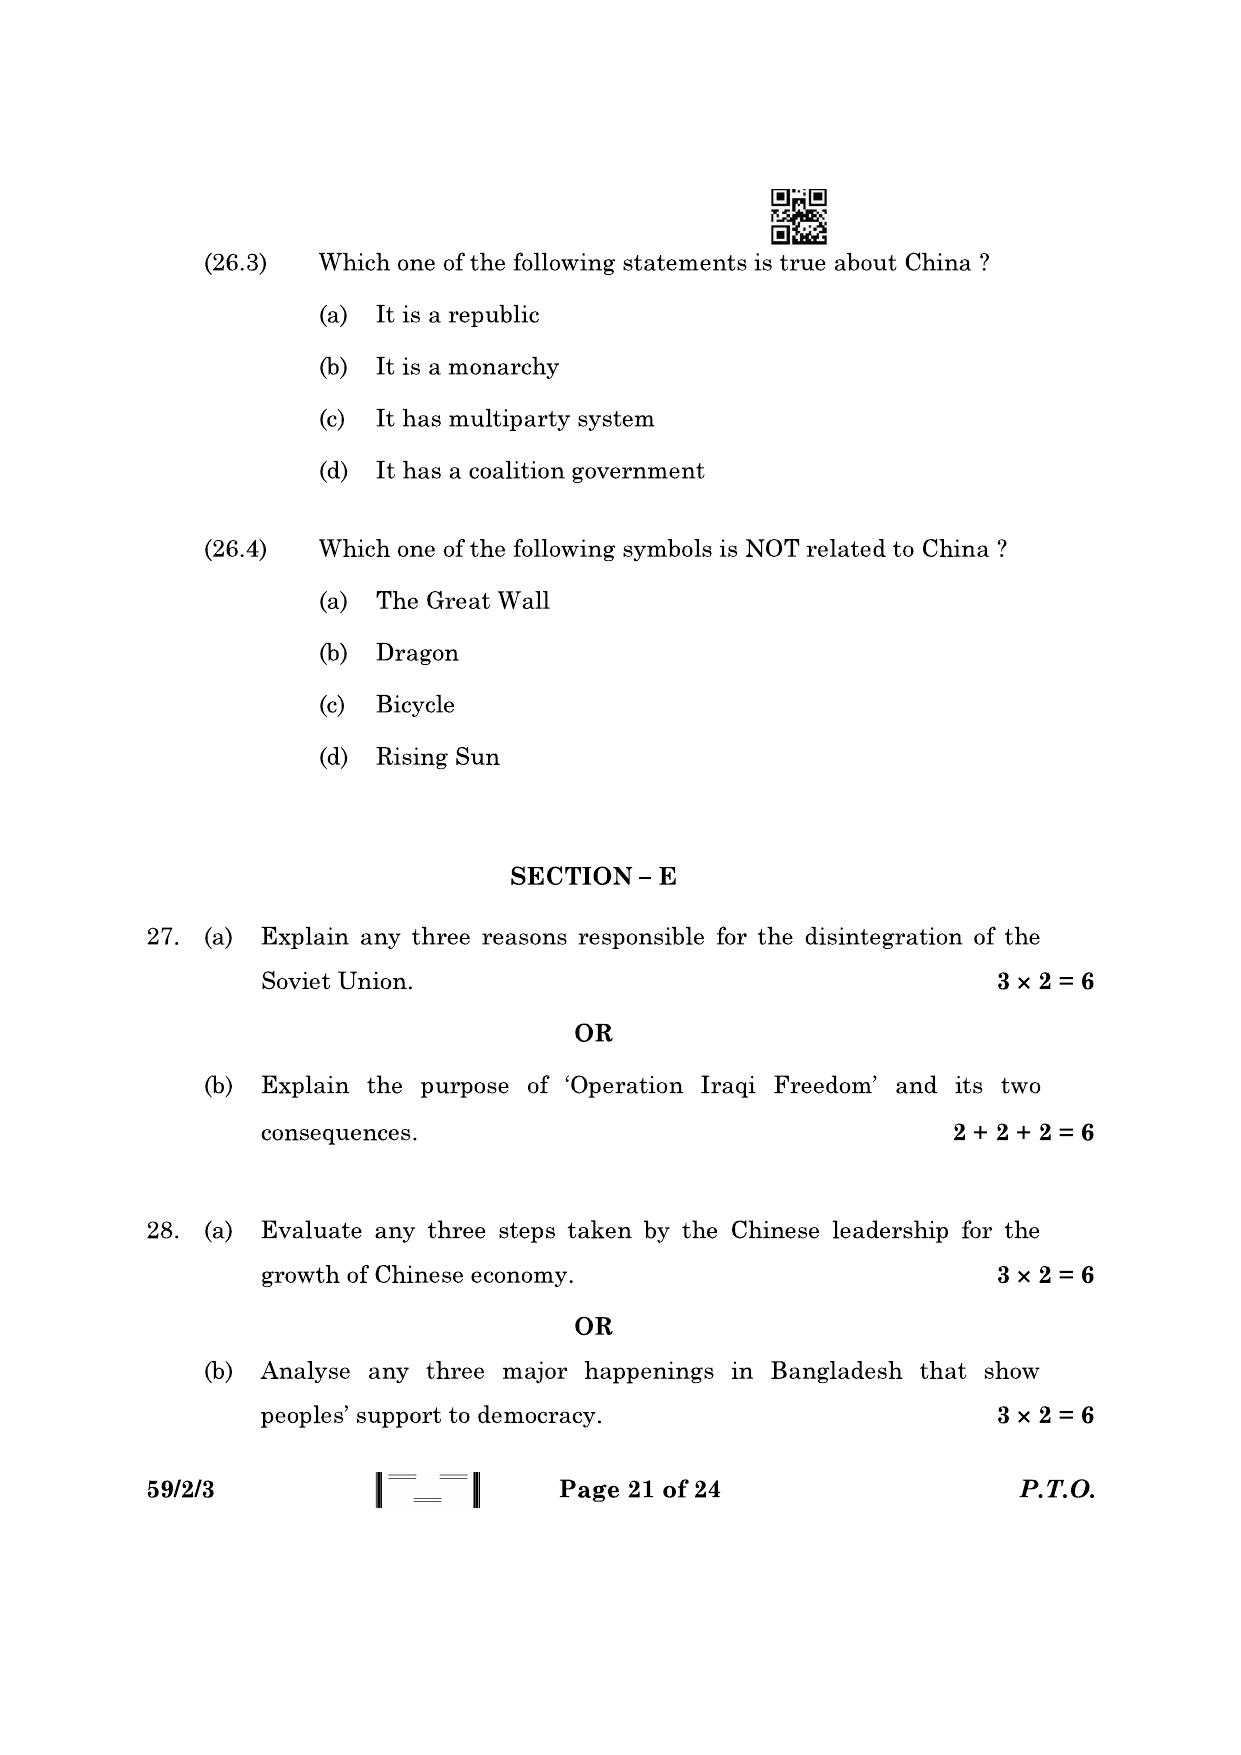 CBSE Class 12 59-2-3 Political Science 2023 Question Paper - Page 21